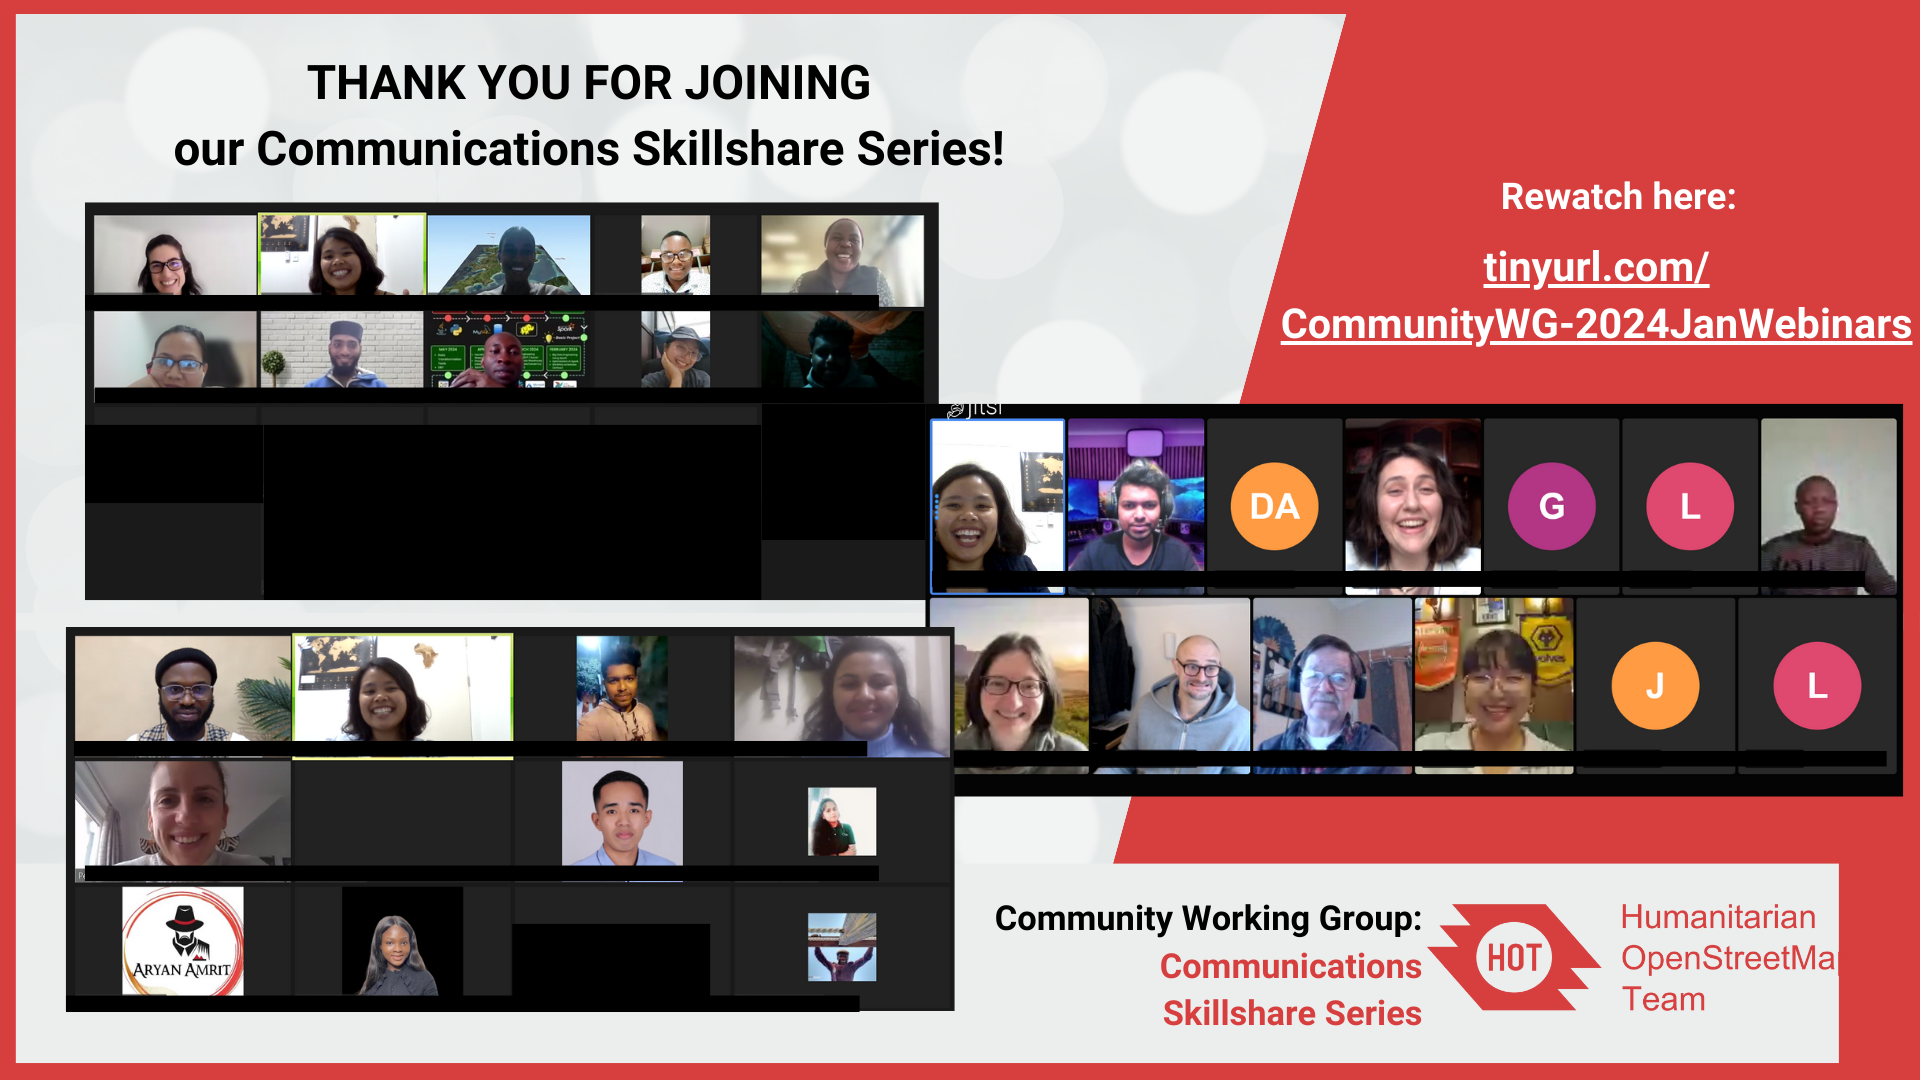 THANK YOU FOR JOINING our Communications Skillshare Series!